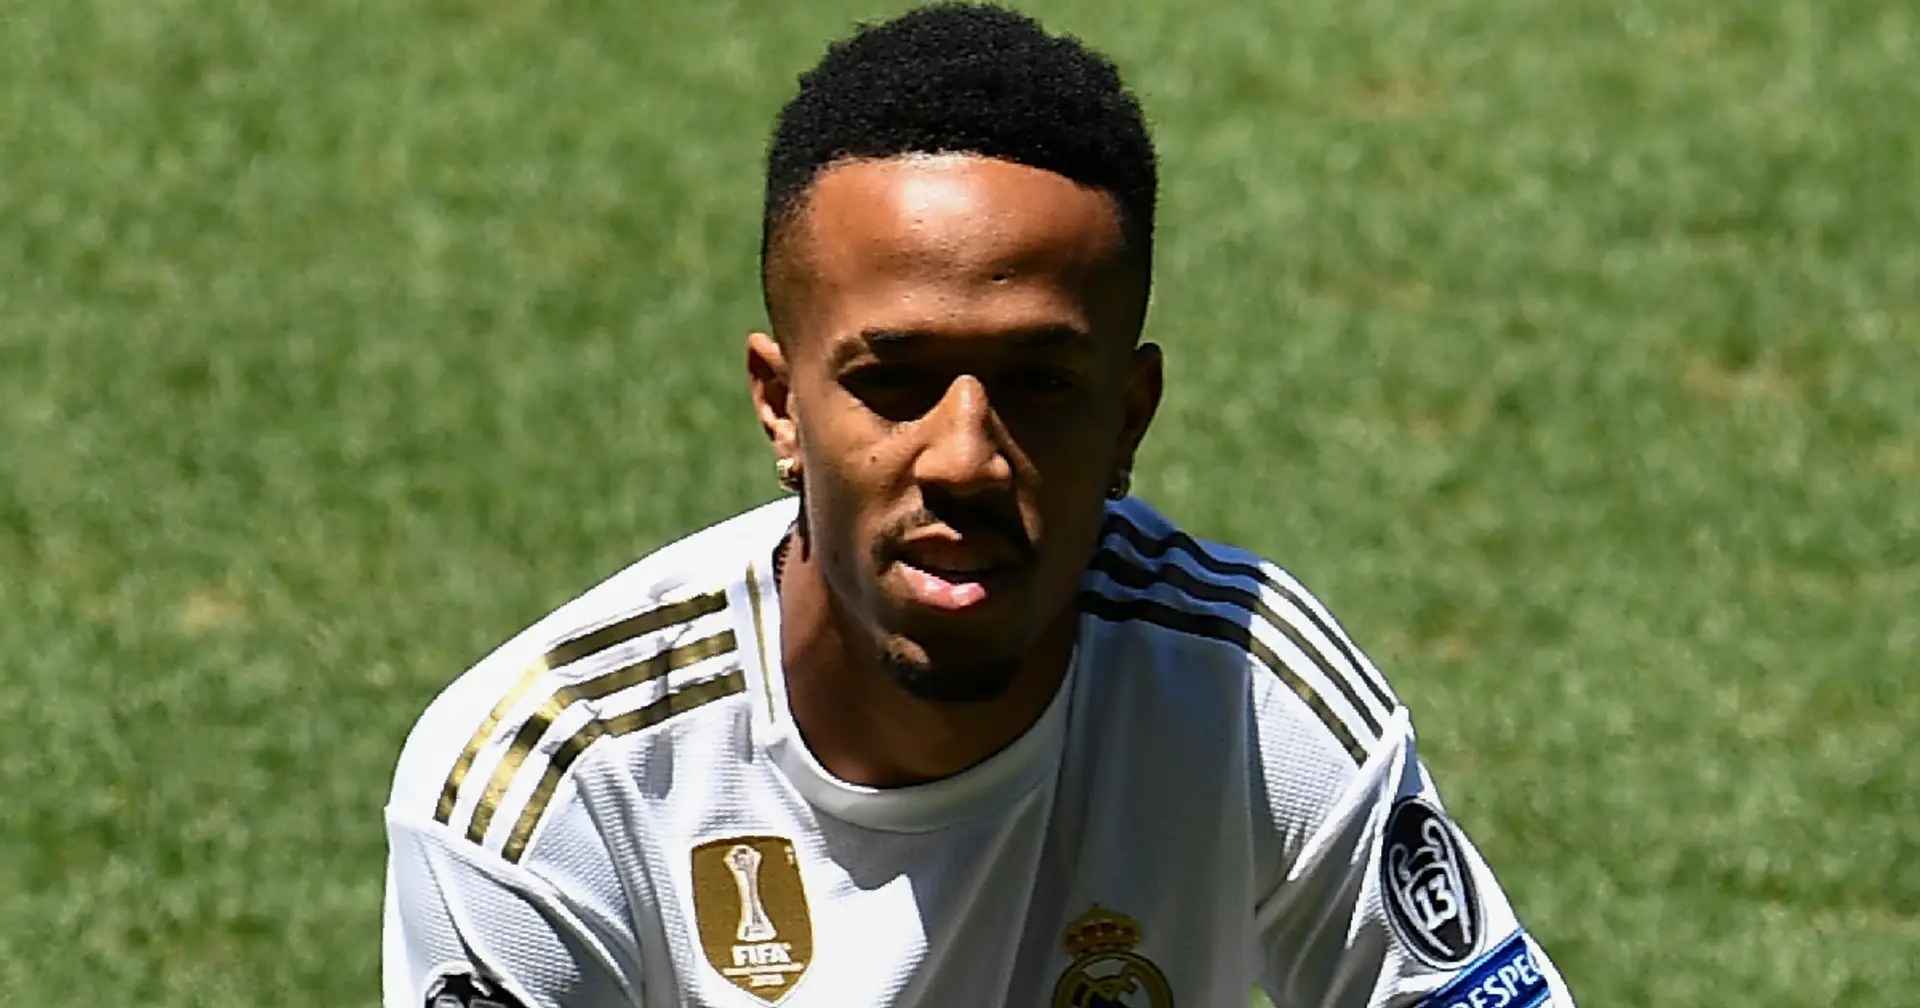 Money-drama: Militao's transfer to Real Madrid set to be investigated 